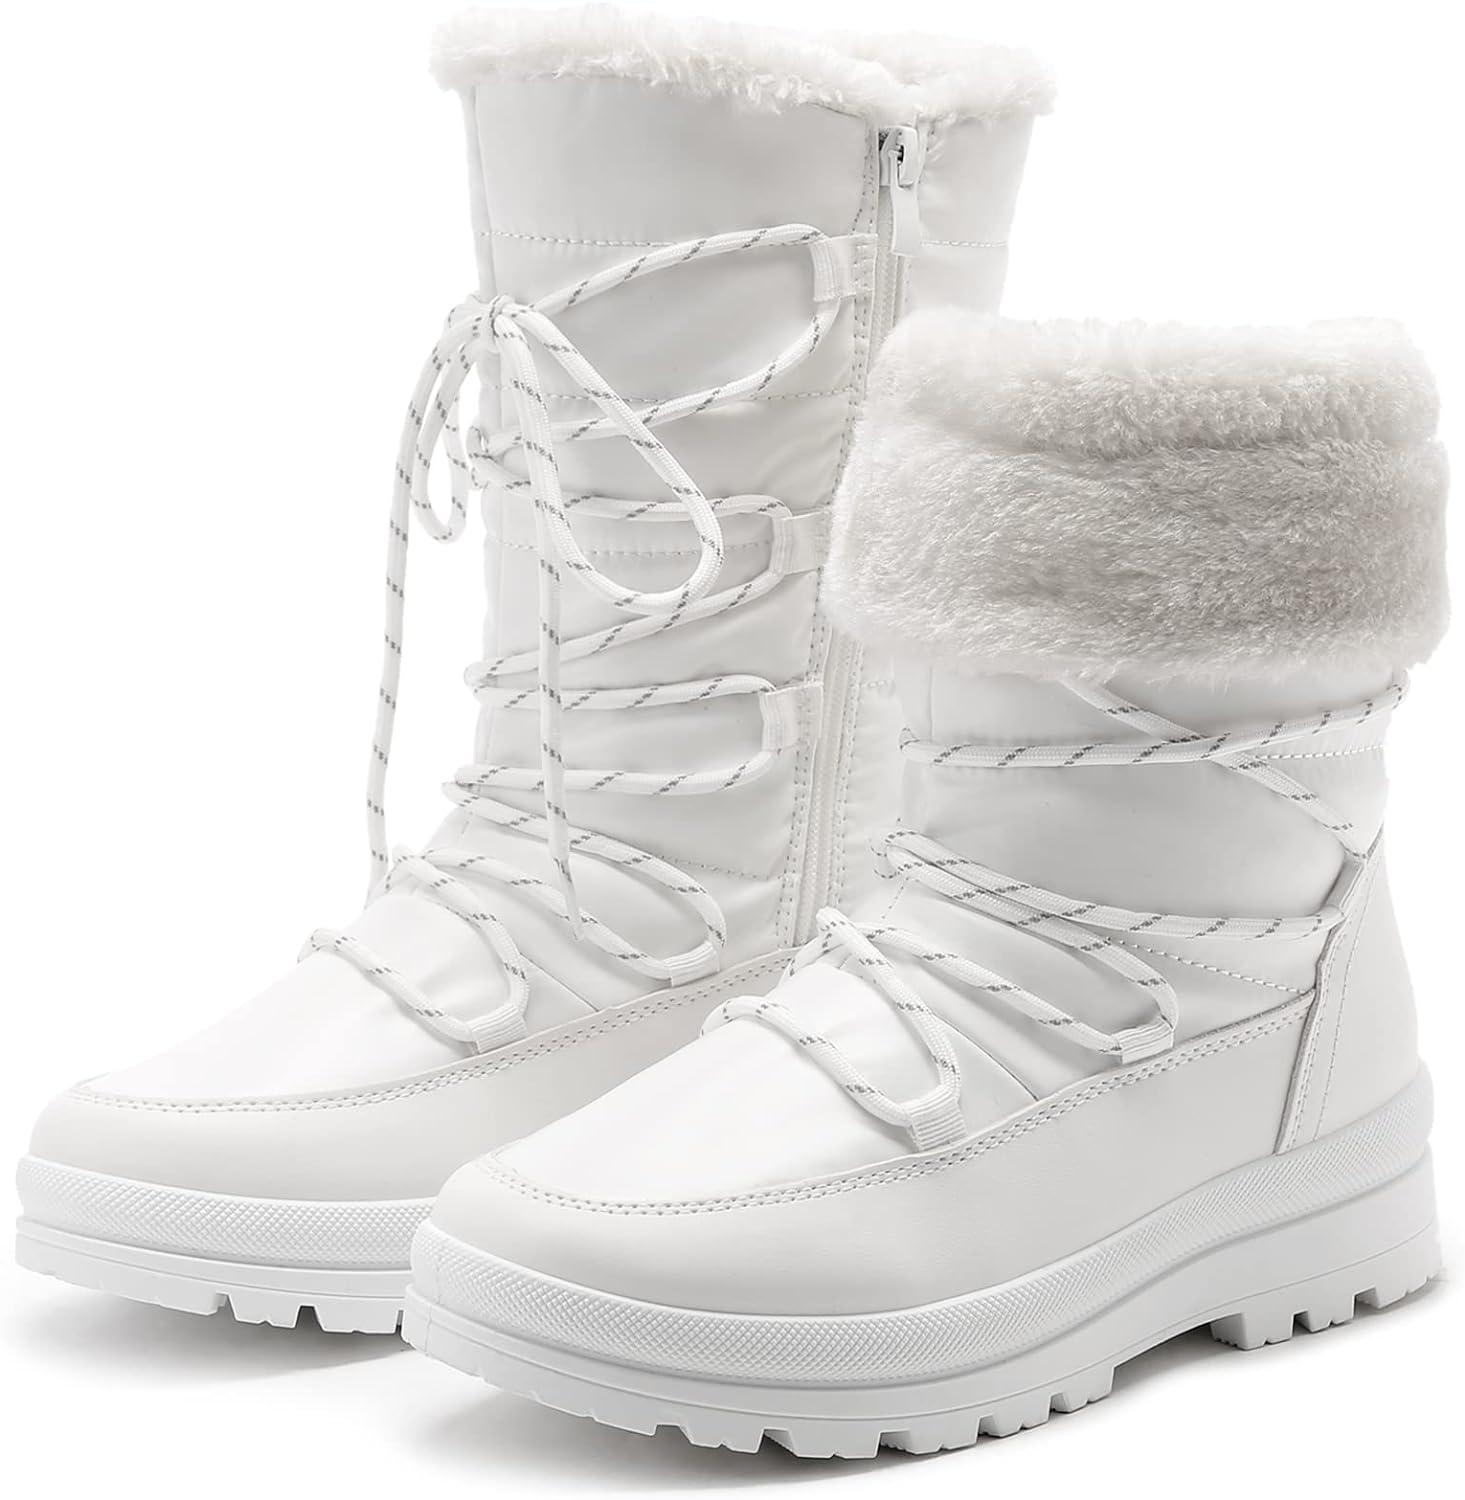 HEAWISH Womens Winter Snow Boot Fur Lined Mid Calf Warm Boots